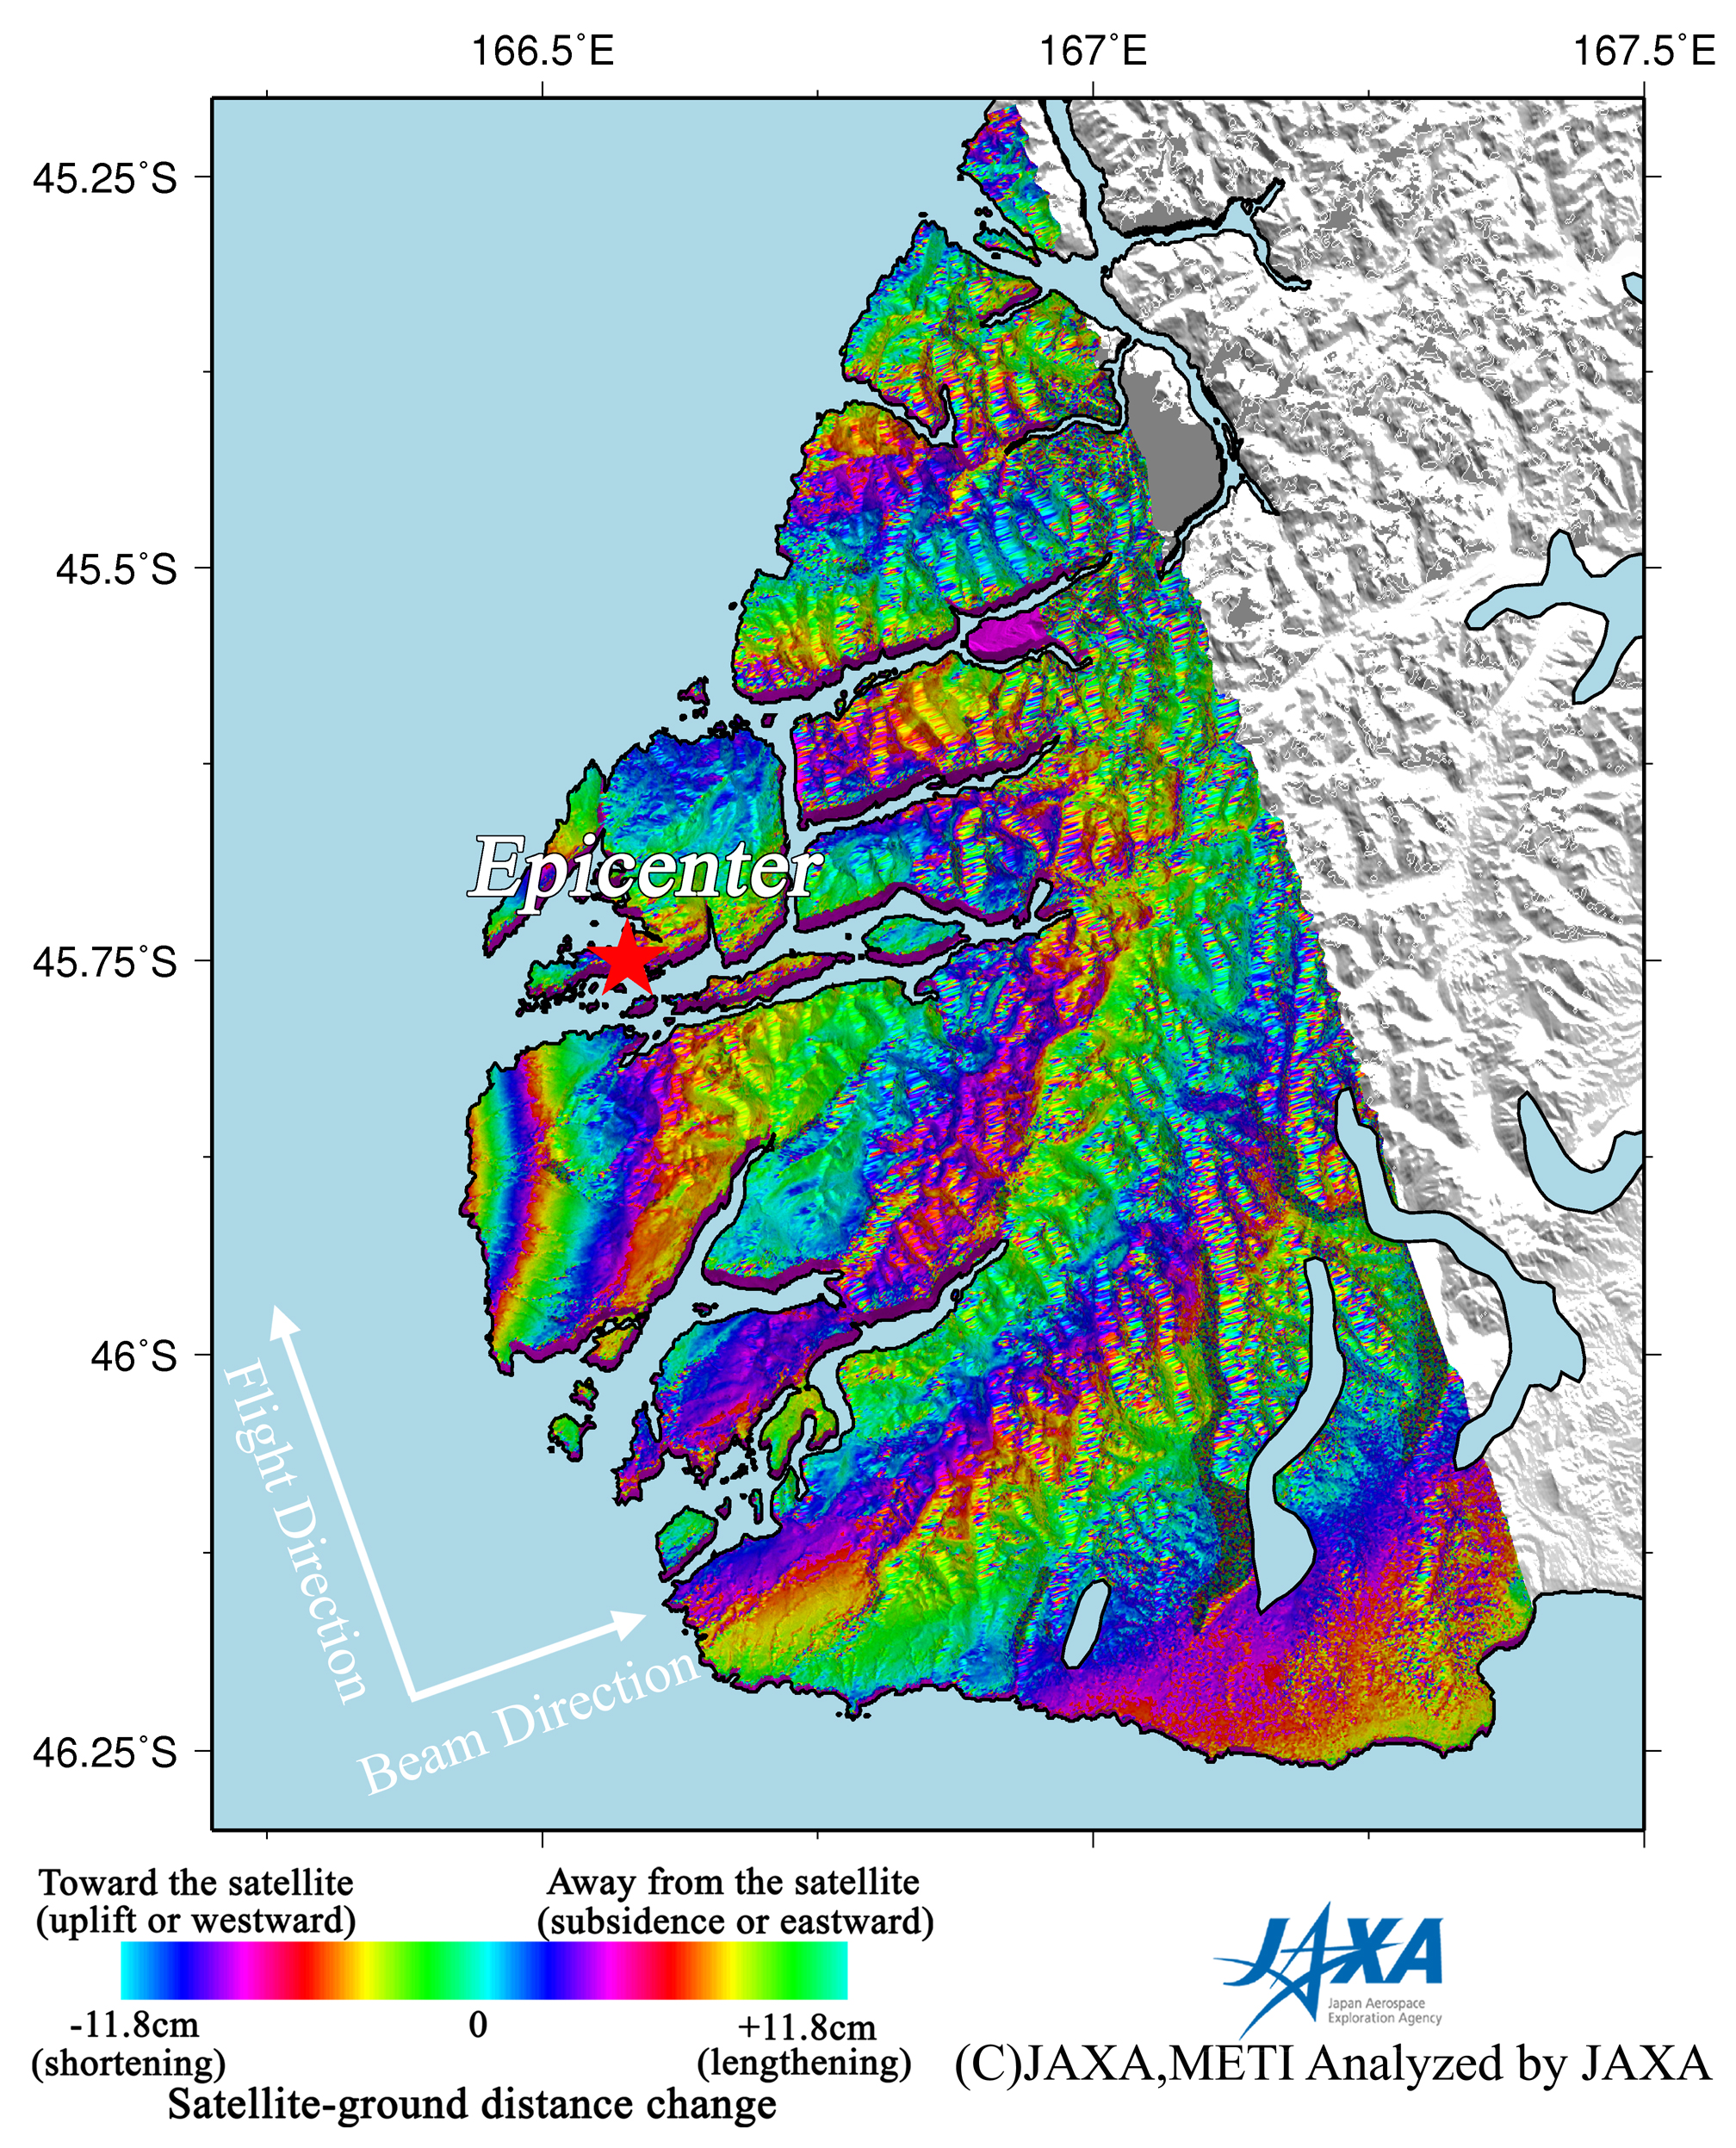 Observation Results of ALOS/PALSAR Relating to the Magnitude 7.6 Earthquake in the South Island, New Zealand, on July 2009 - Figure 1 left is an interferogram generated from PALSAR data acquired before and after the earthquake using the DInSAR technique. A color pattern illustrates changes of satellite-ground distance for the period.